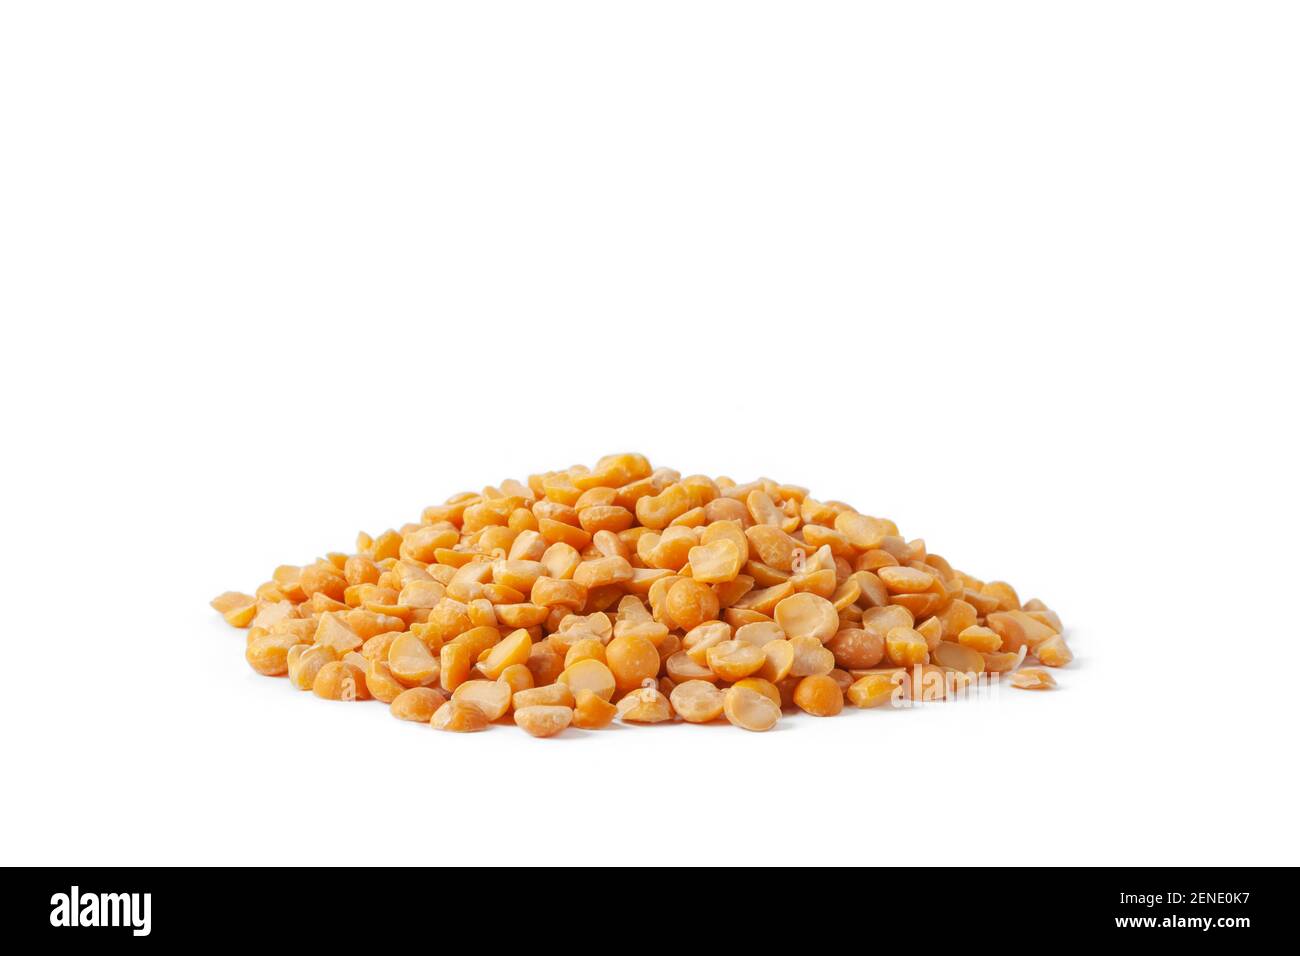 A small hill of yellow, dry peas. Stock Photo